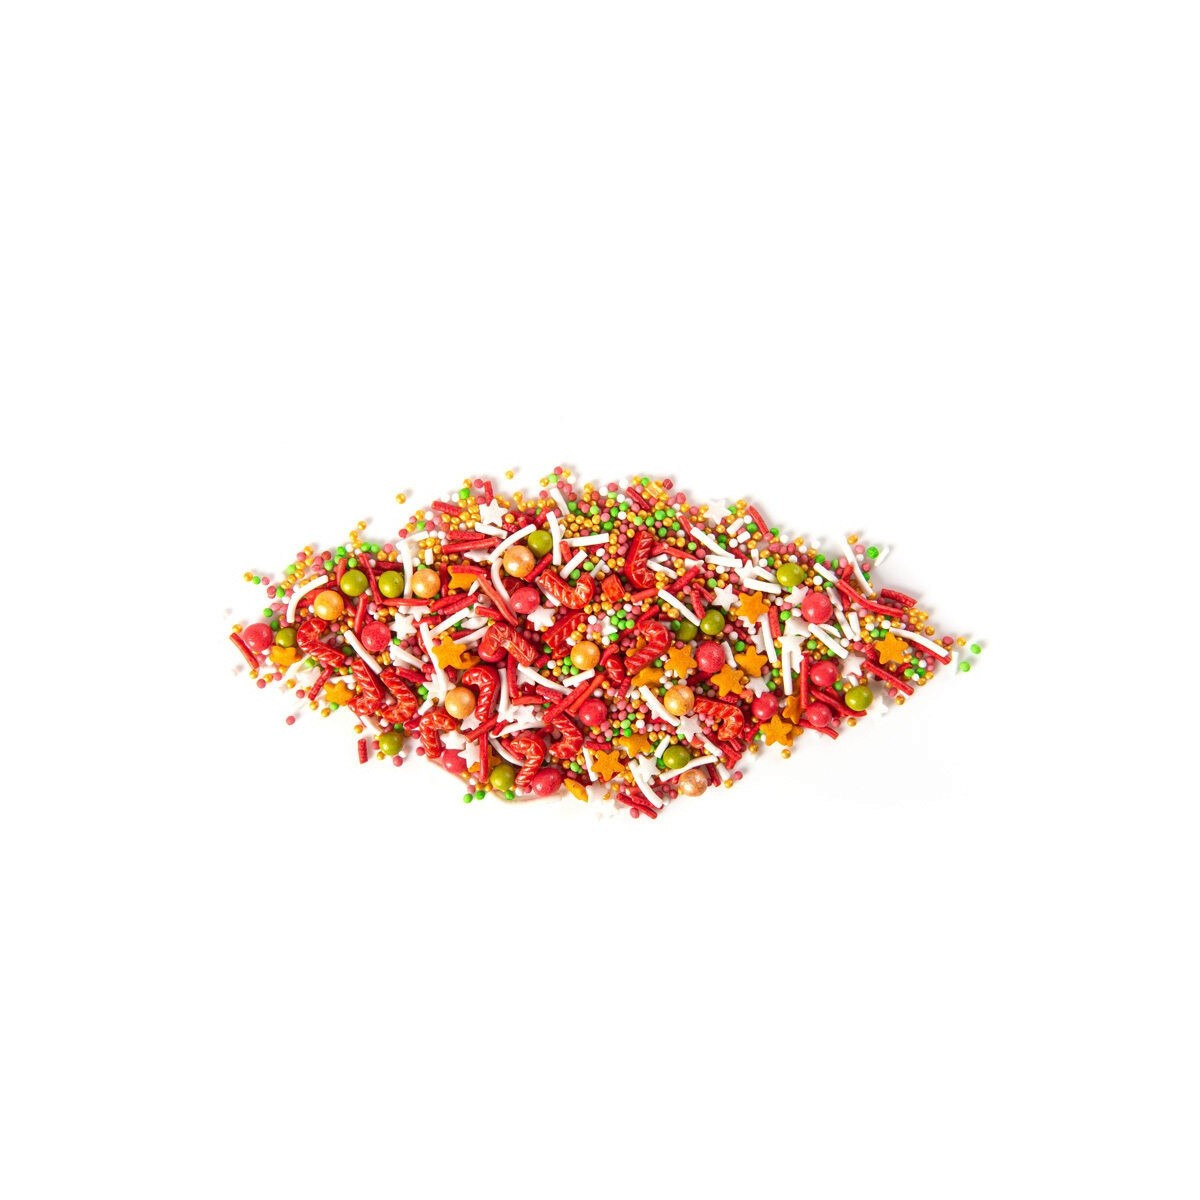 61213 MIX DECORS NOEL SUCRE ORGE/ETOILE ROUGE/OR/VERT 500GR S/CD